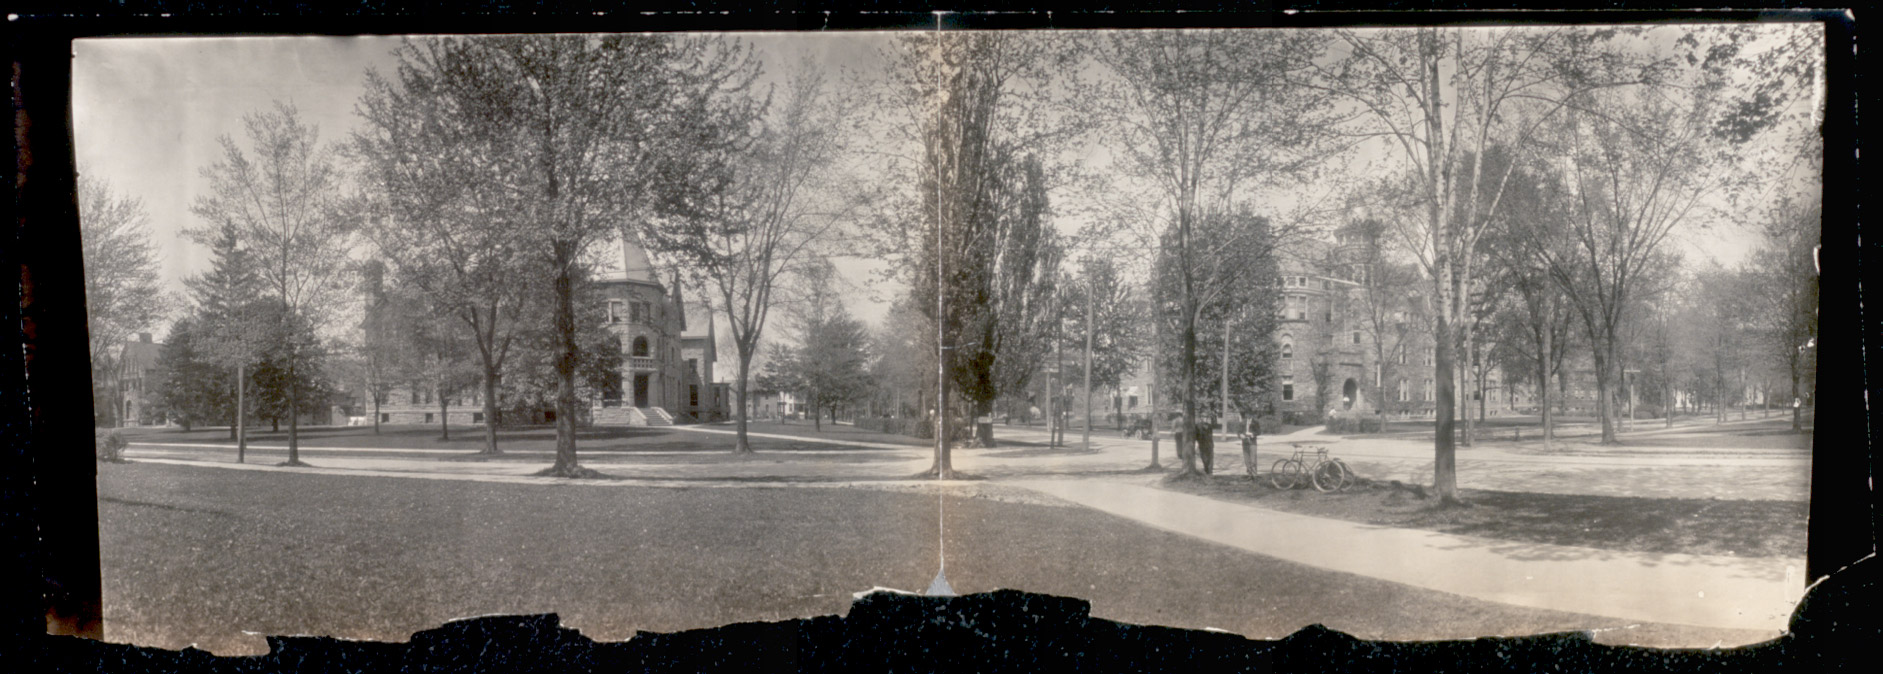 A scene from Oberlin College around the turn of the 20th century. (Library of Congress)